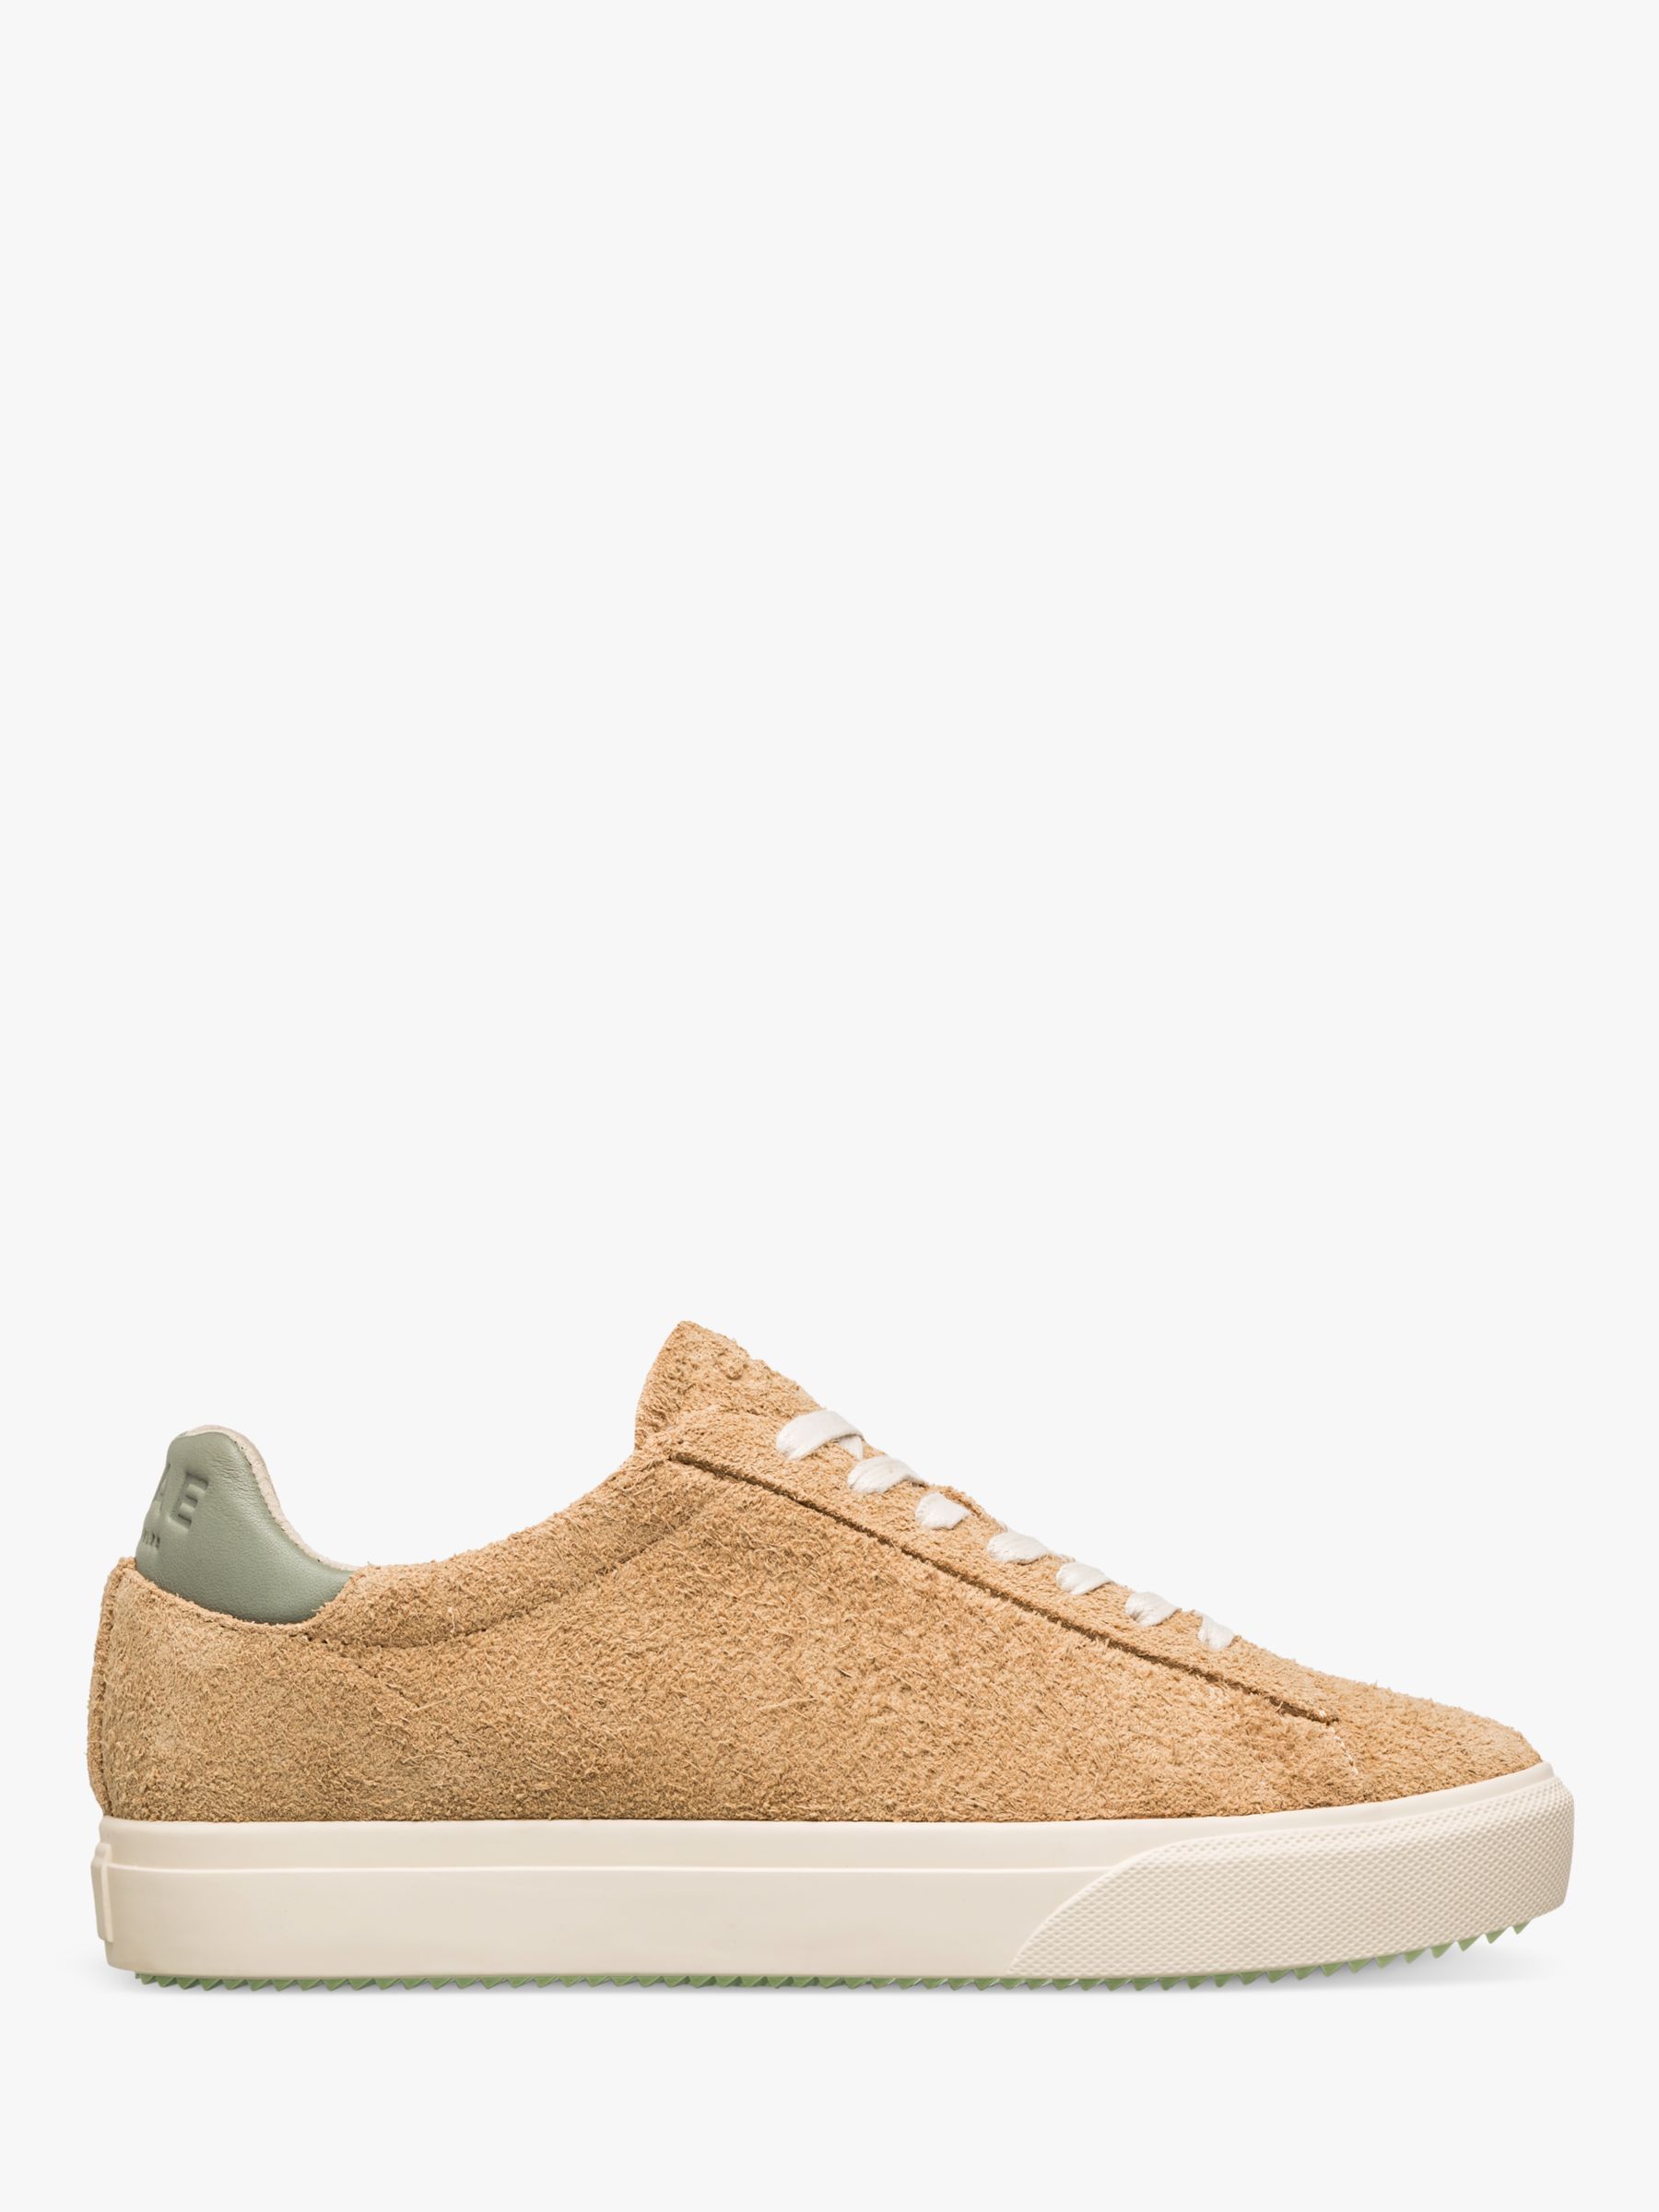 CLAE Bradley Venice Suede Lace Up Trainers, Starfish/Tea, 10.5